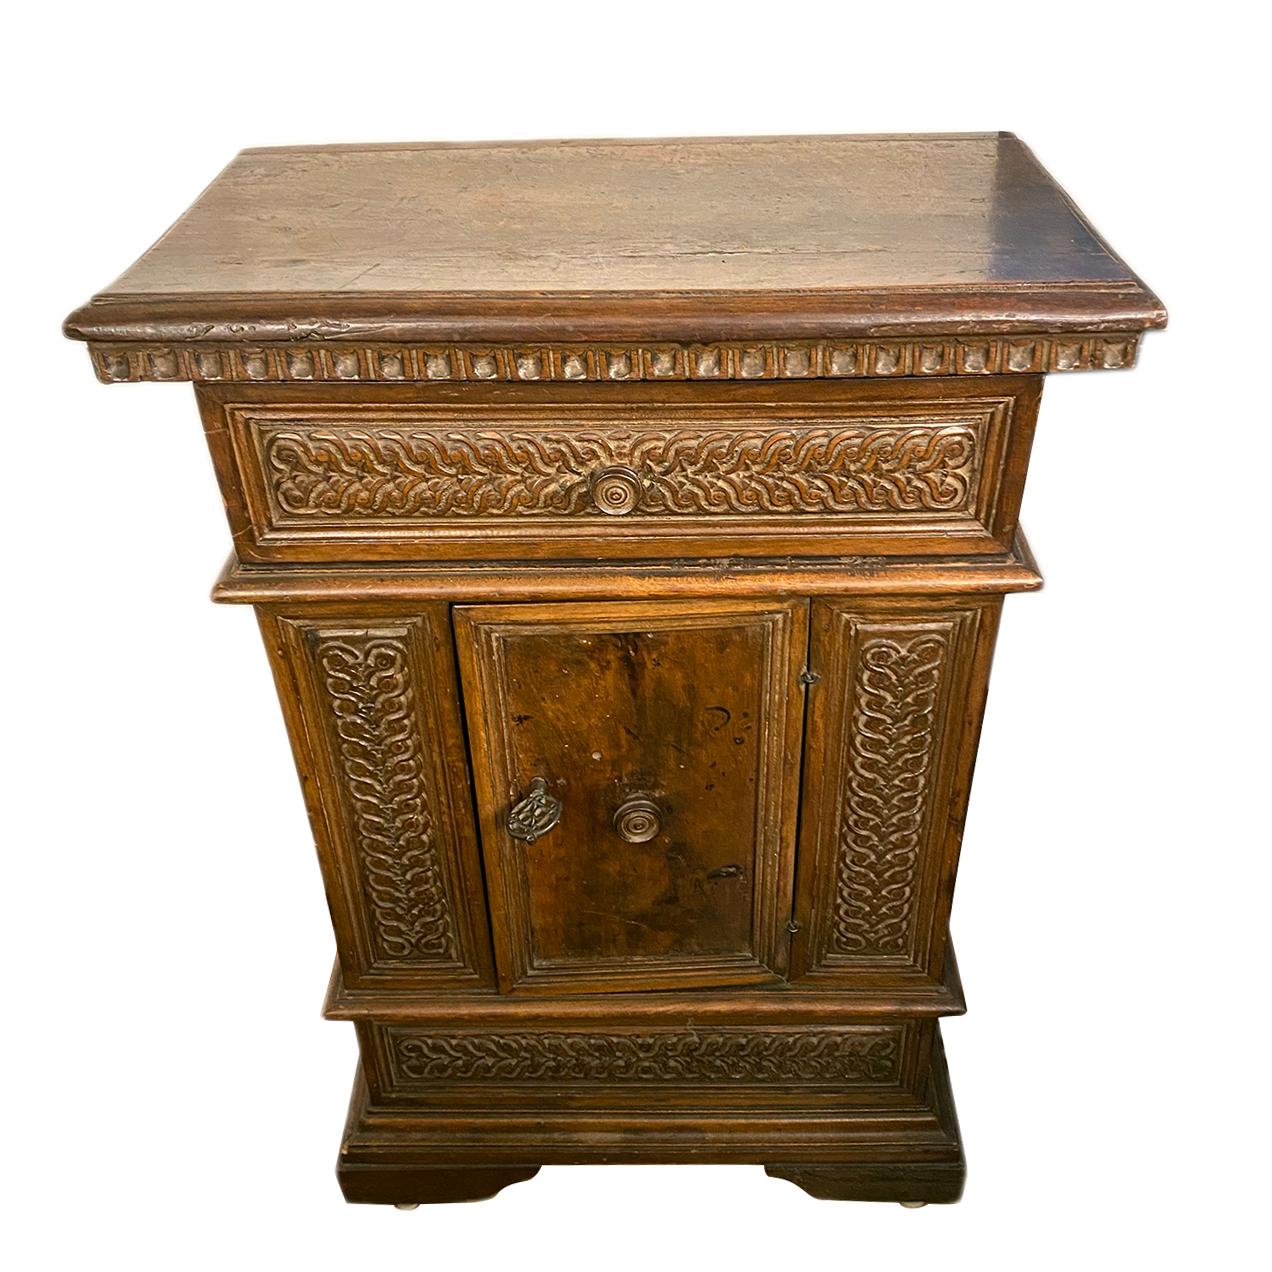 An Italian late 19th century hand carved wood cabinet.

Measurements:
Height 31.5